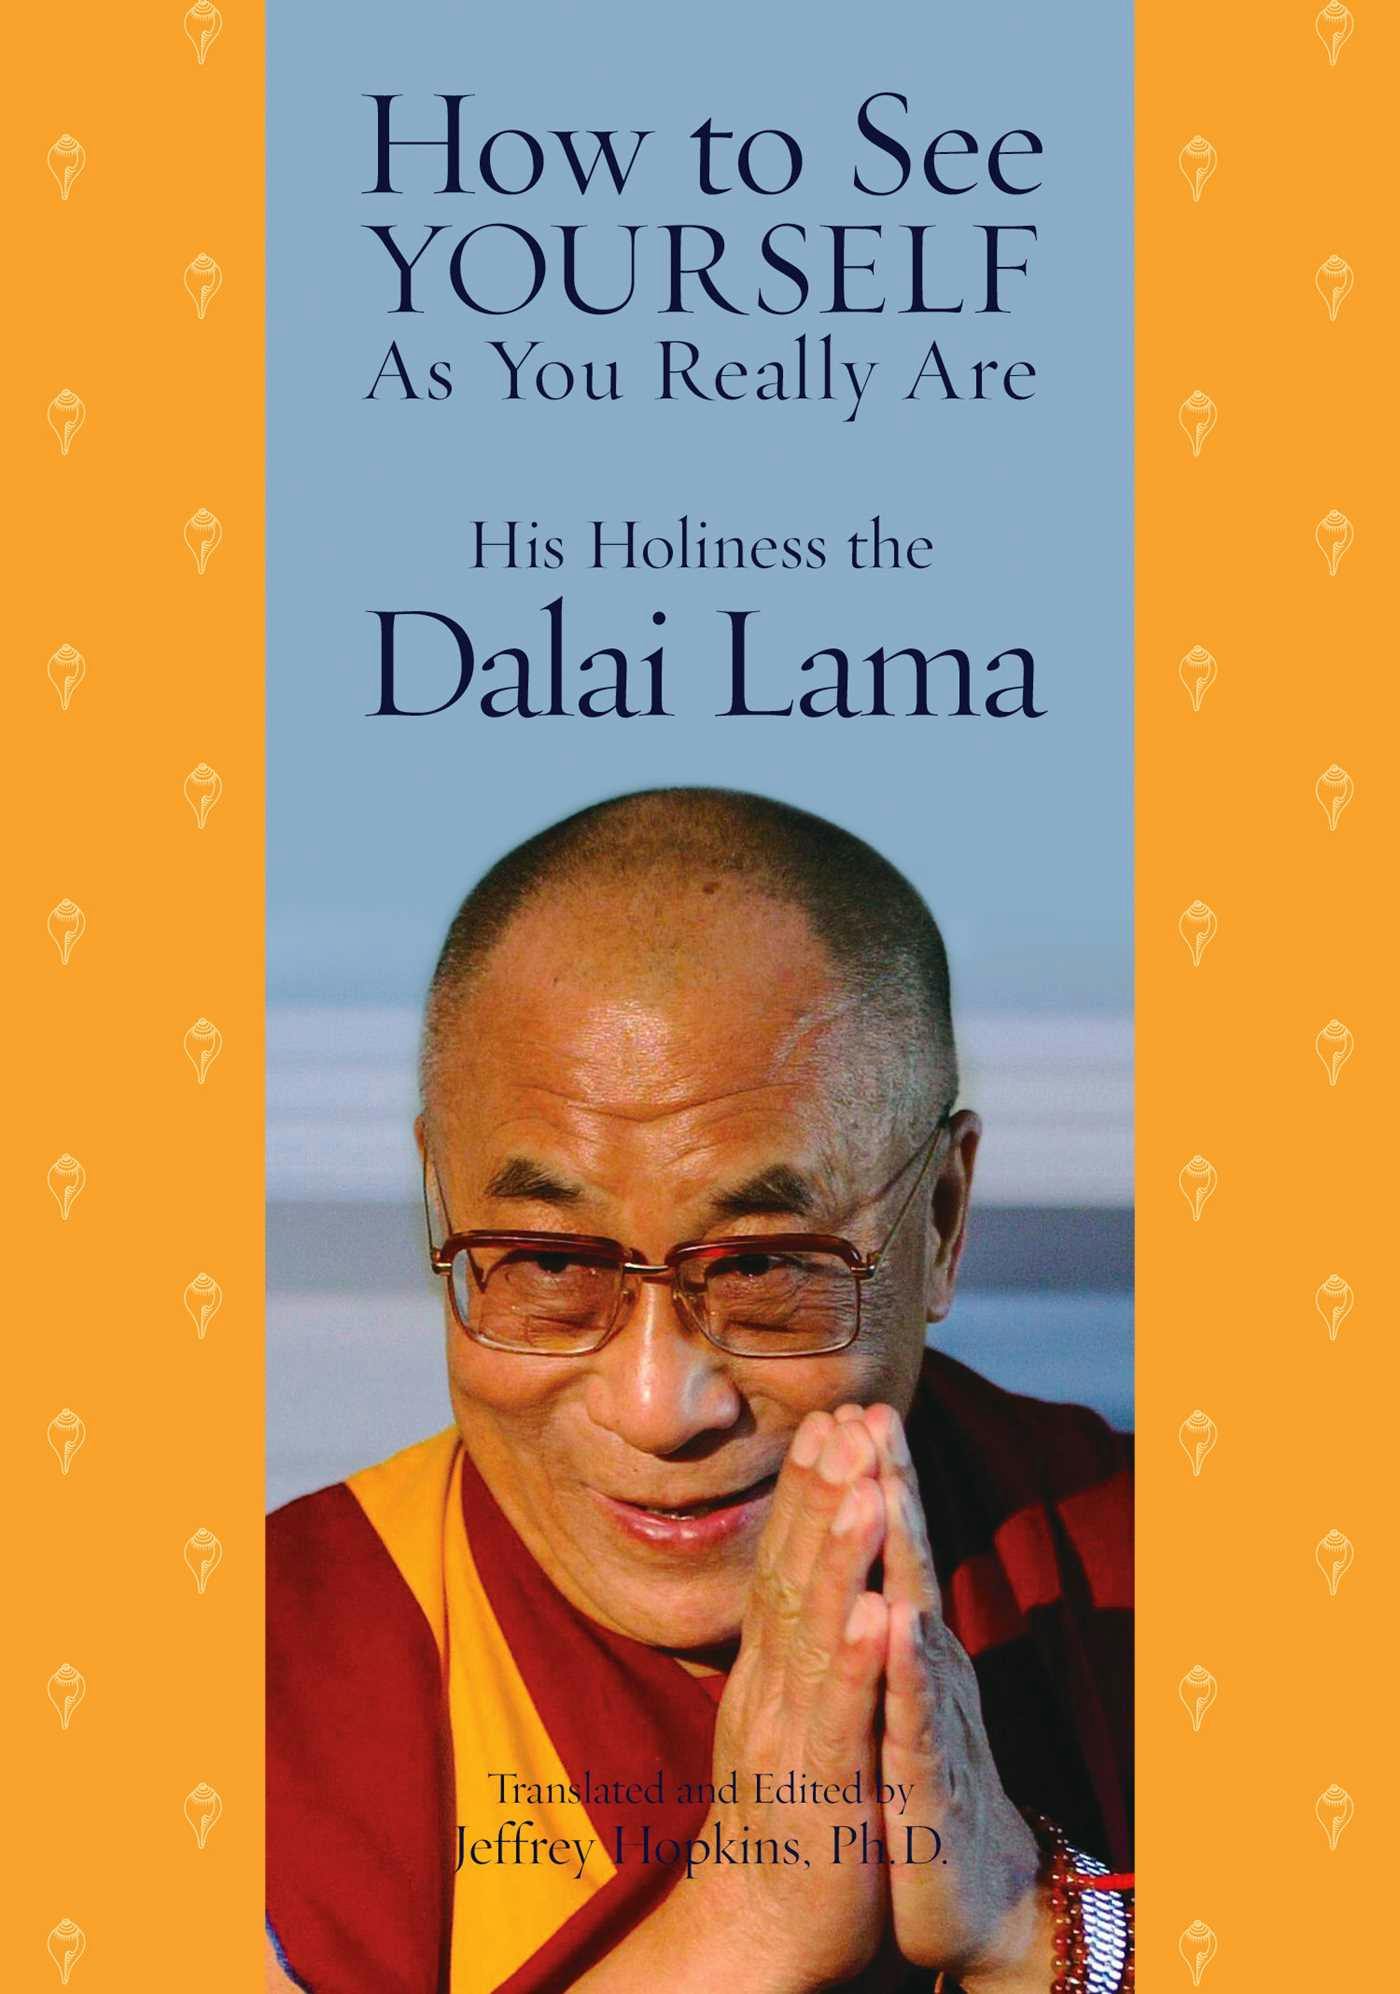 How to See Yourself As You Really Are - His Holiness the Dalai Lama